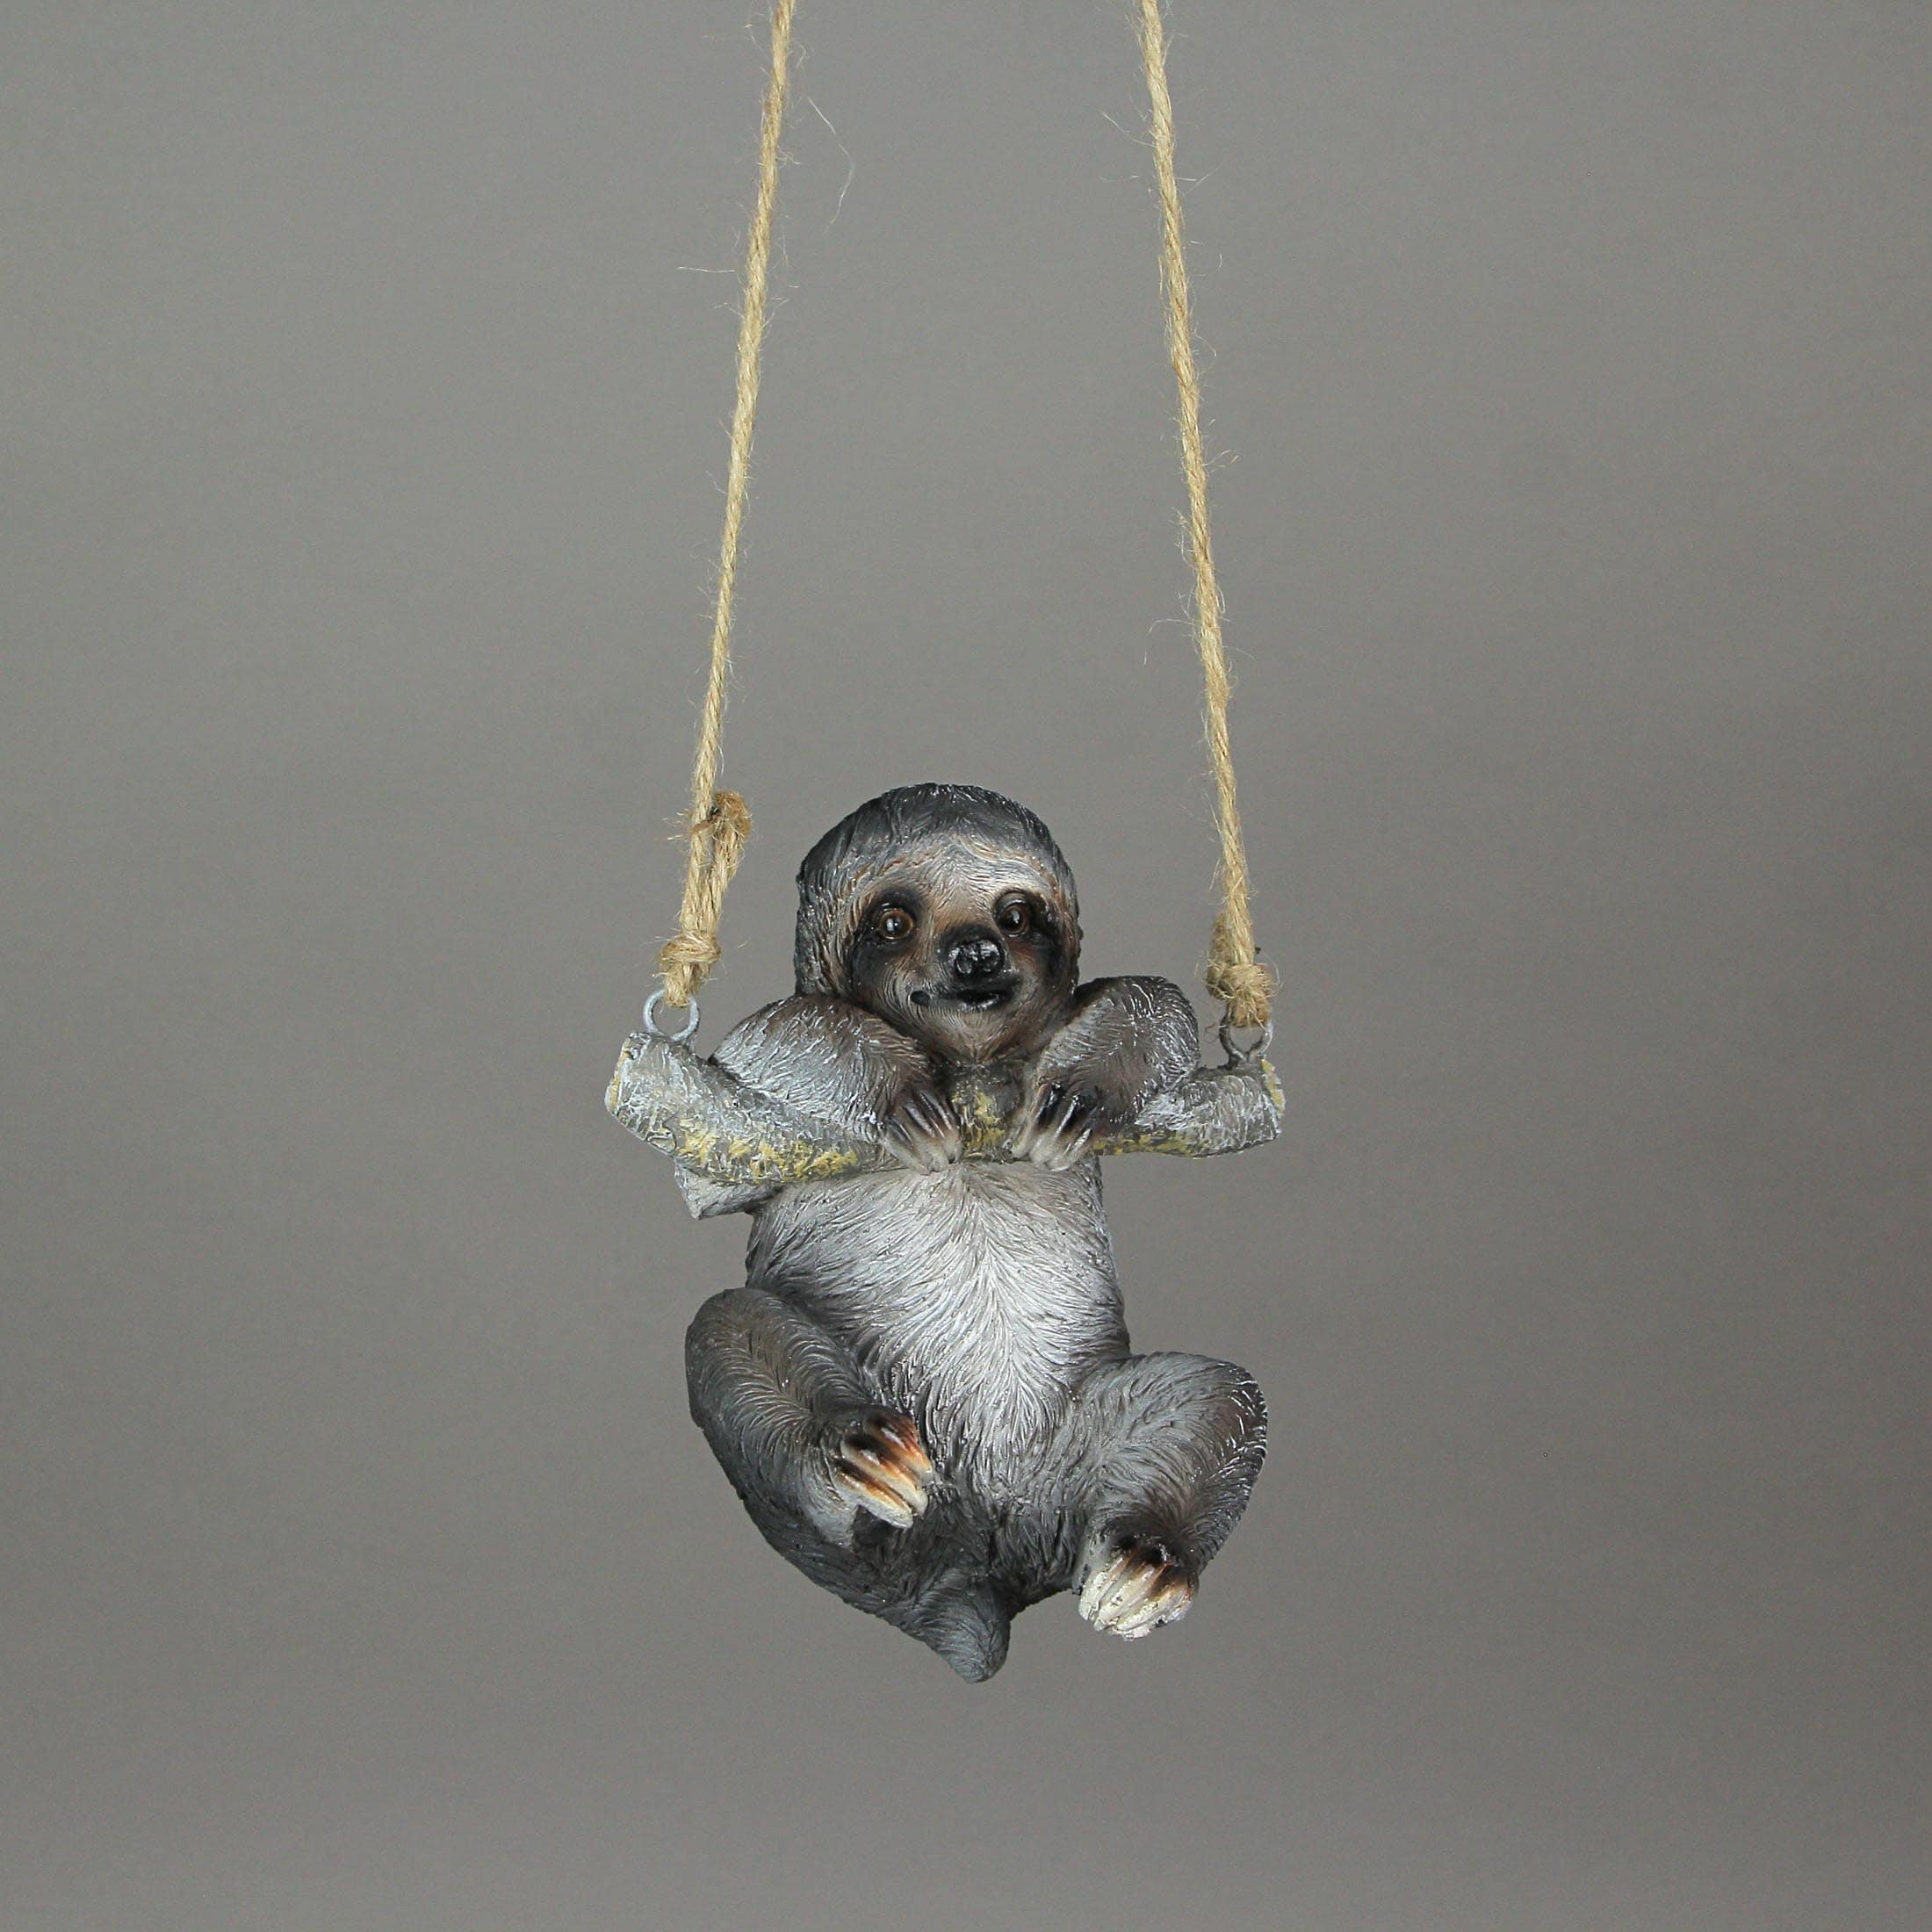 Hand-Painted Resin Three-Toed Sloth Hanging Sculpture With Rope Hanger - 6.25 X 5 X 3.75 inches